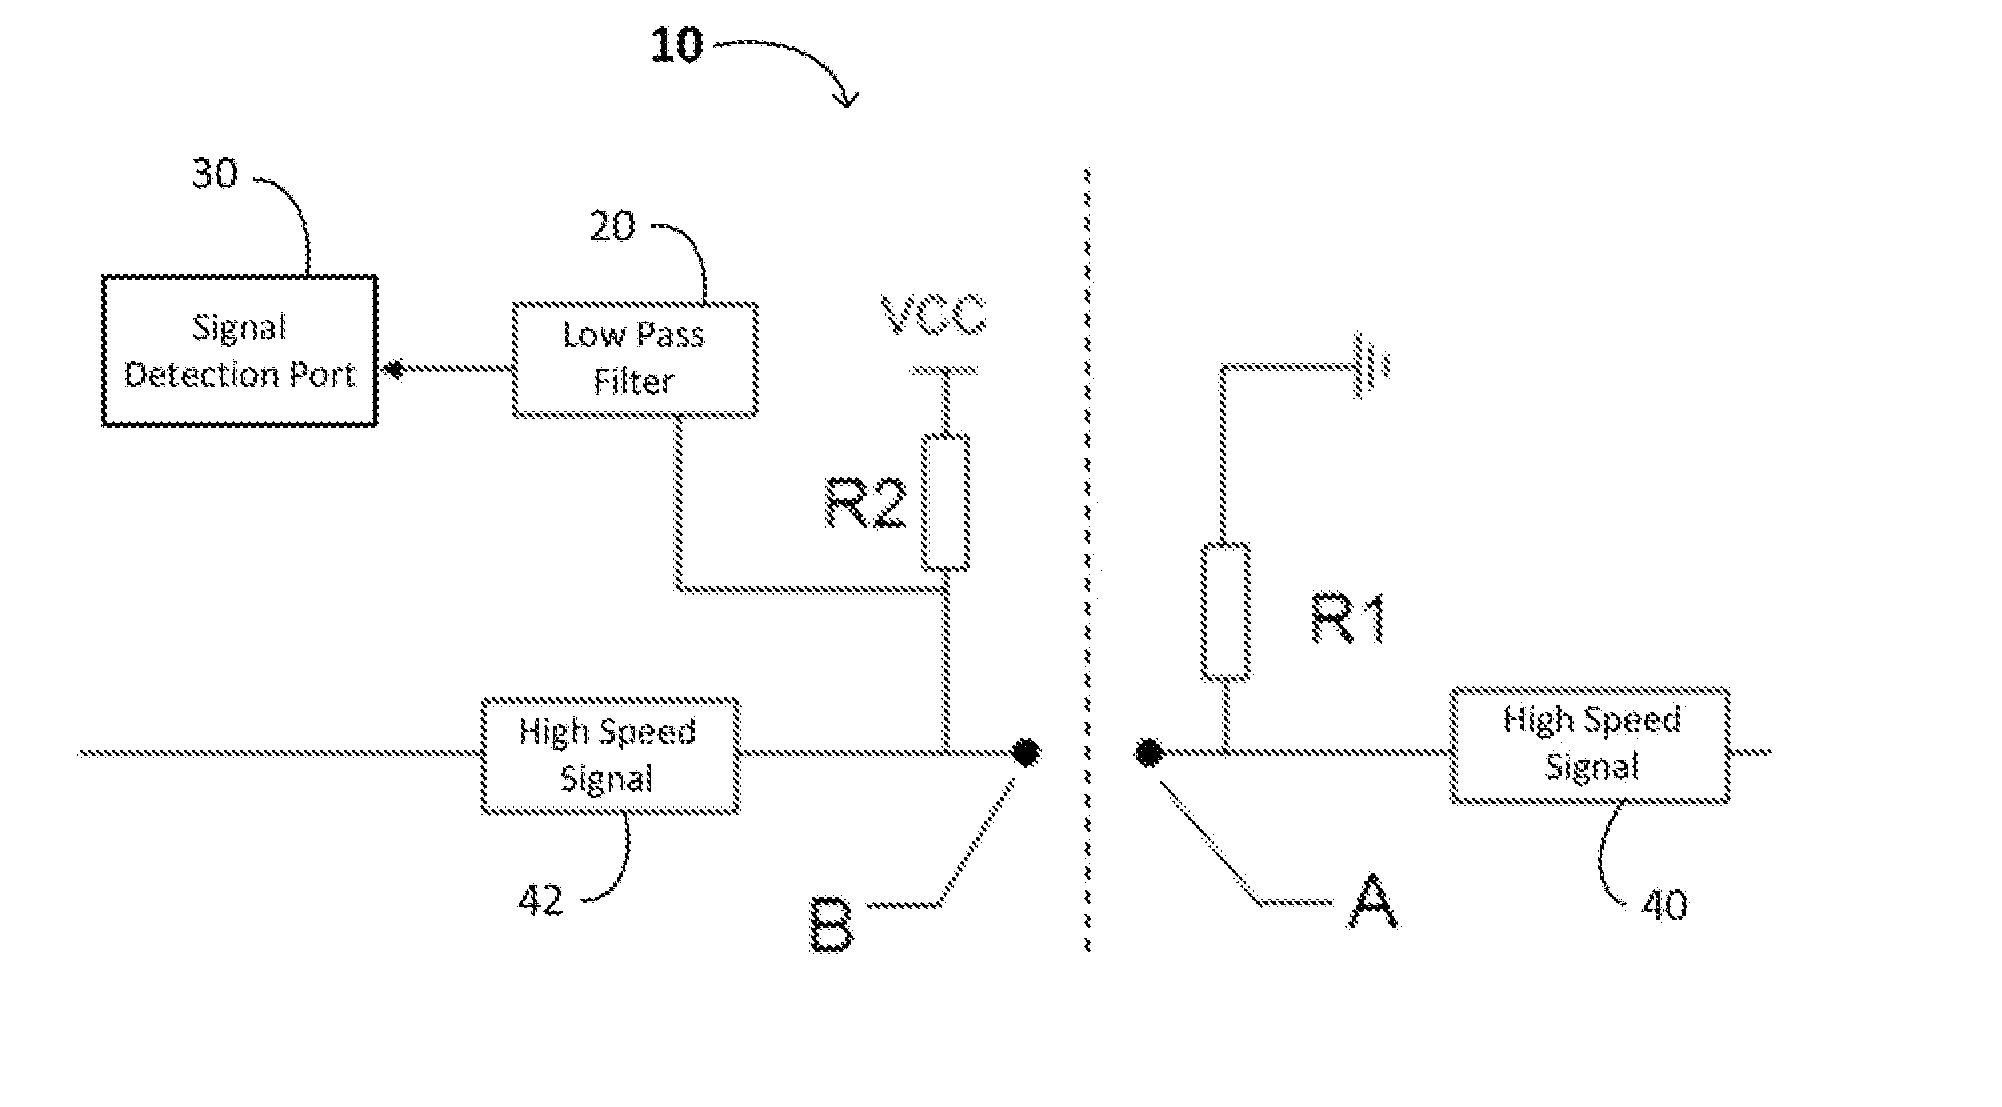 DC Level Detection Circuit Between High Speed Signal Line Connecting Ports, A System Including the Circuit, and Methods of Making and Using the Same